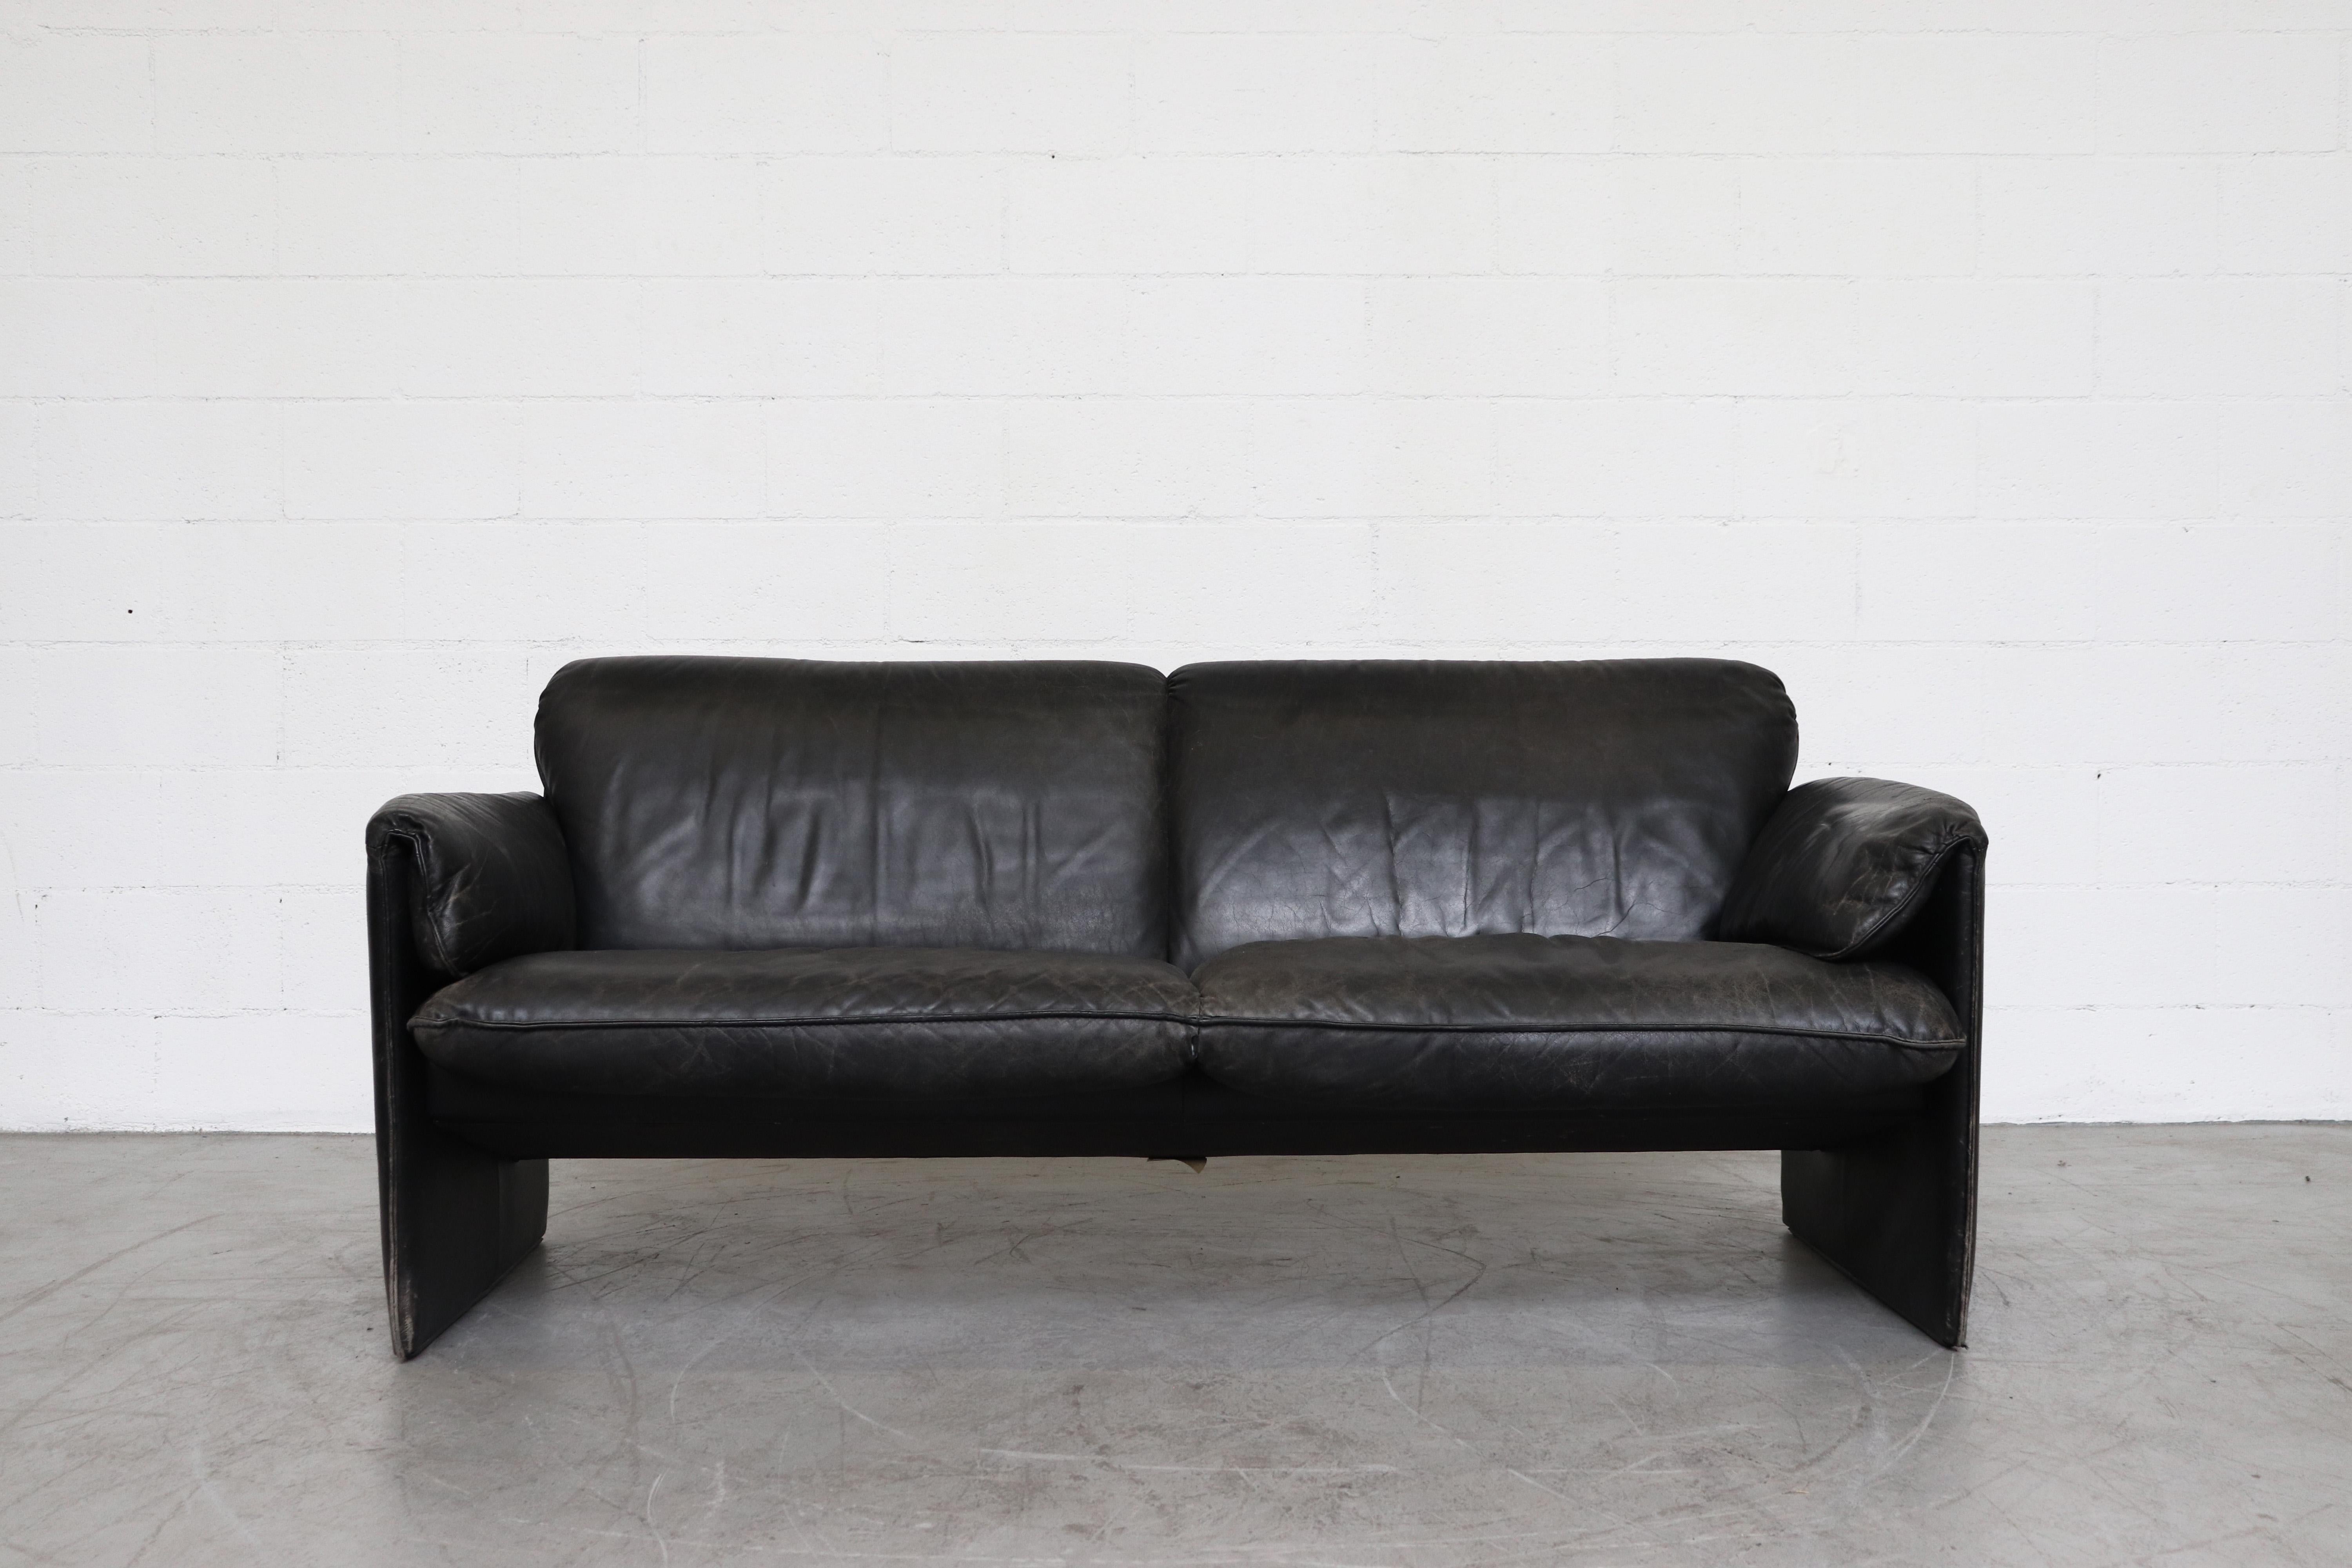 Handsome black leather 'Bora Bora' 2-seat sofa by Leolux. In original condition with visible wear and patina as detailed in pix. Two available is similar condition.